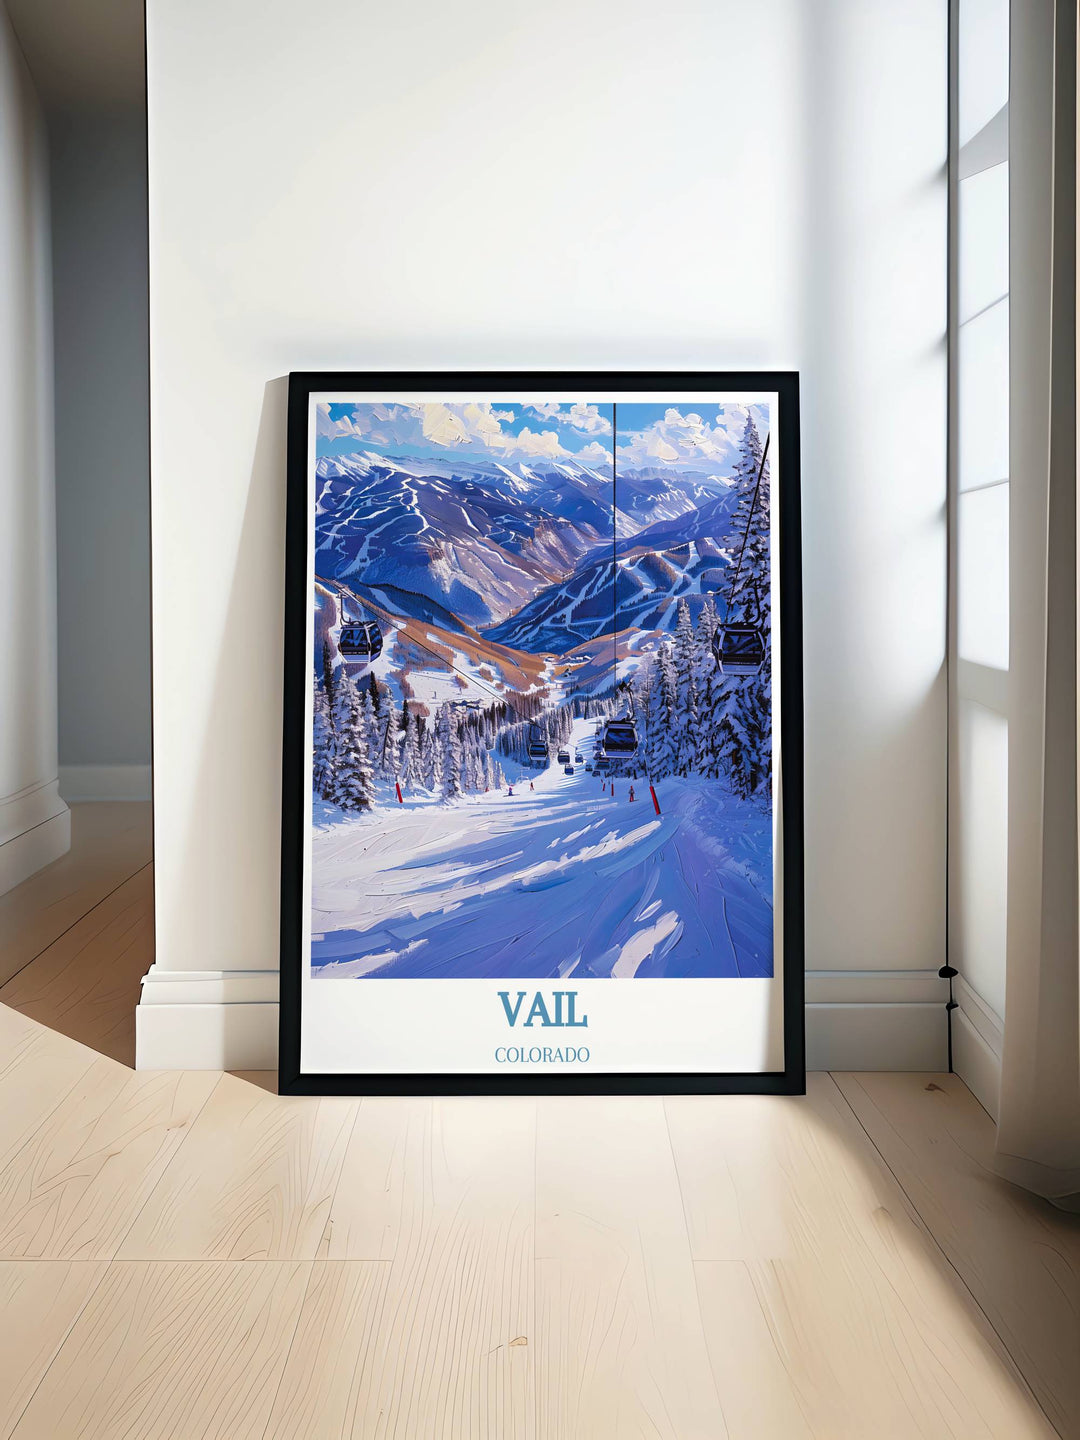 Vail Ski Resort art print featuring the expansive terrain and picturesque landscapes of Colorados premier ski destination. A beautiful addition to any gallery wall, capturing the essence of mountain adventure.